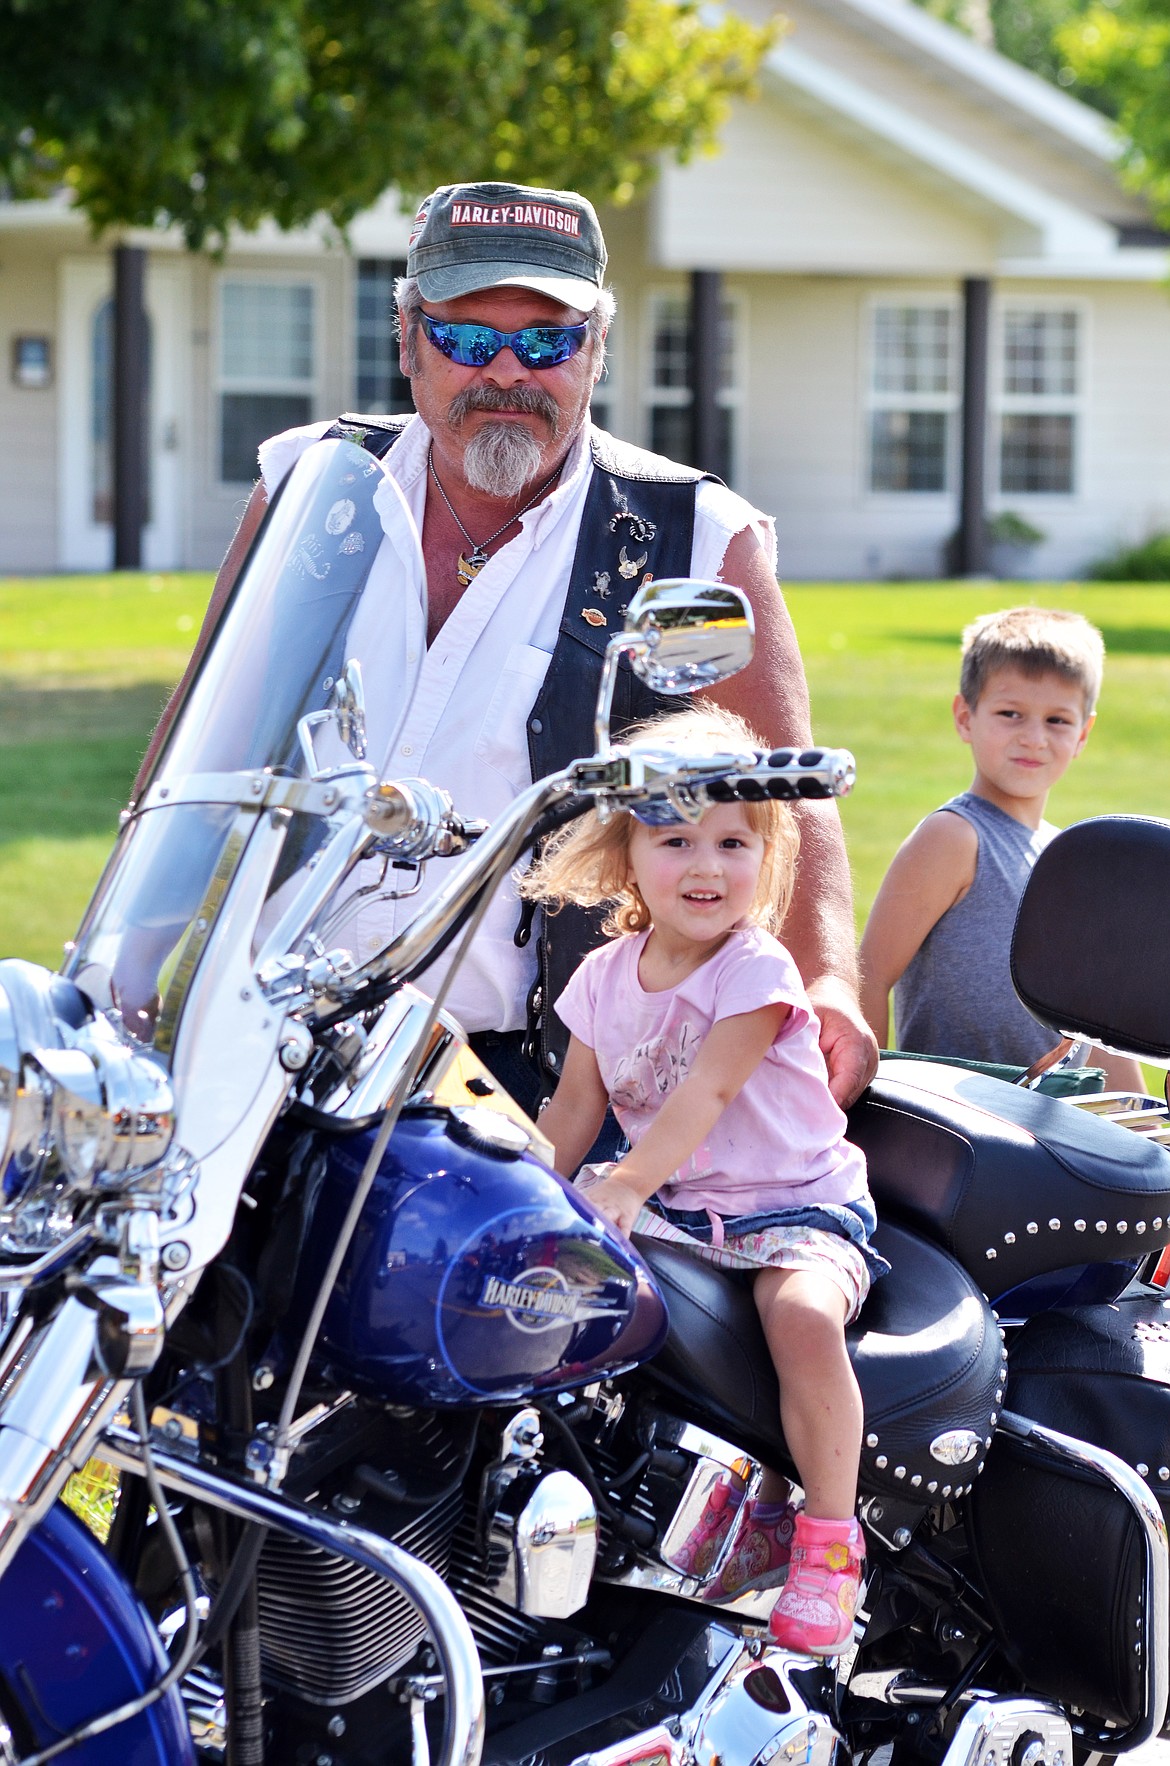 Plains local Buck Larson helped young Cadence Hedahl onto his Harley so she could get a photo on her favorite bike at the show. (Erin Jusseaume/Clark Fork Valley Press)